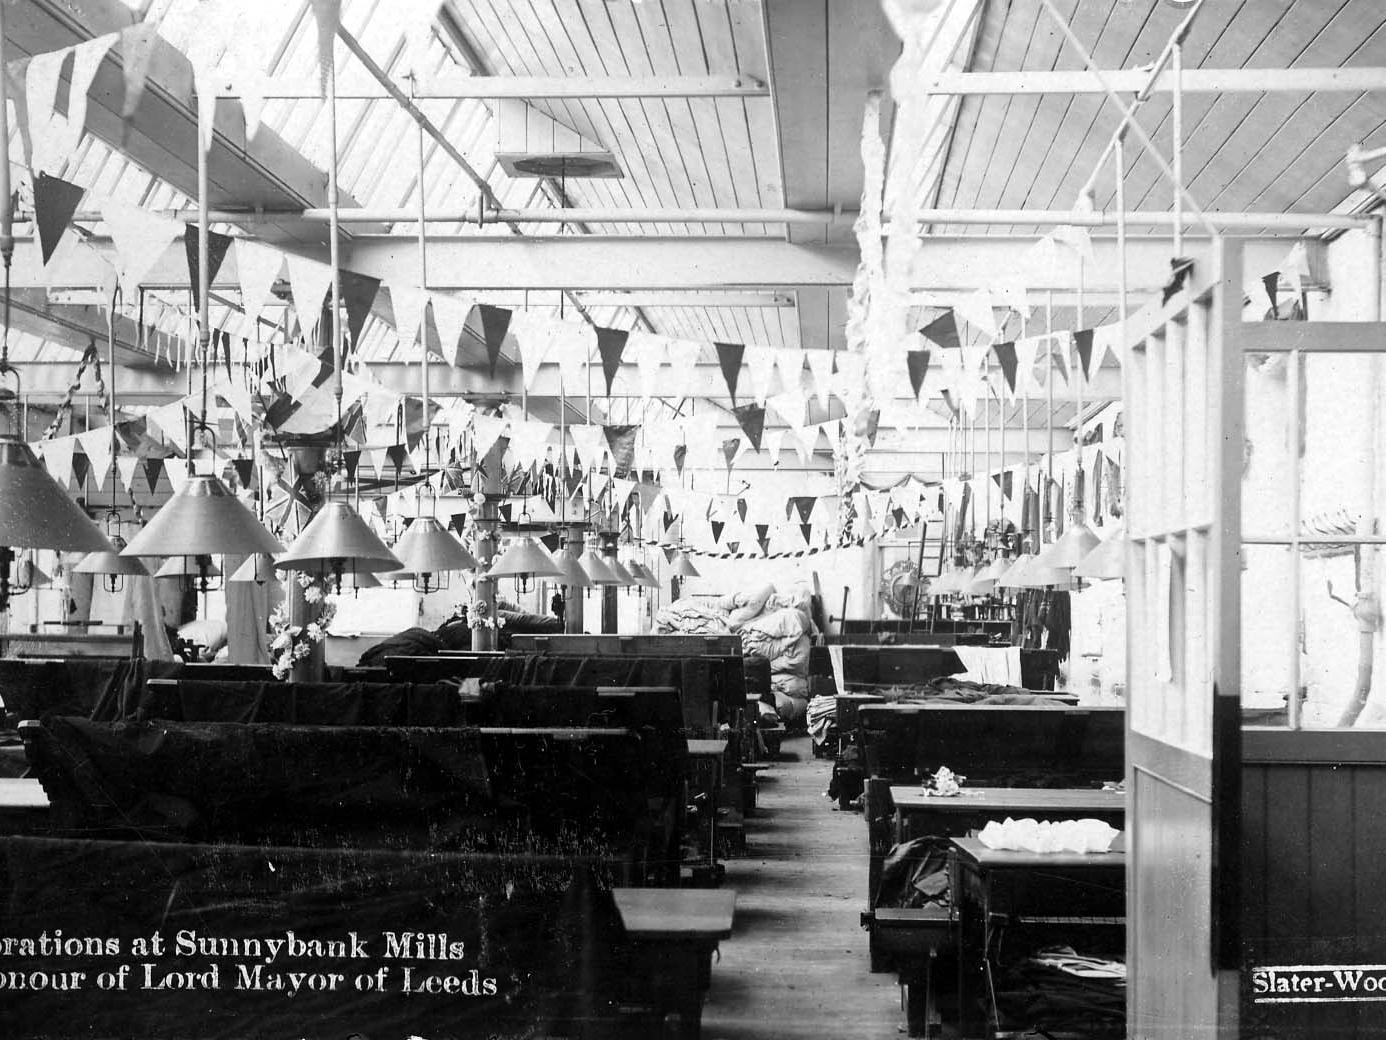 Inside Sunnybank Mills on Town Street, showing decorations in celebration of their owner Edwin Woodhouse being made Lord Mayor of Leeds in 1905.